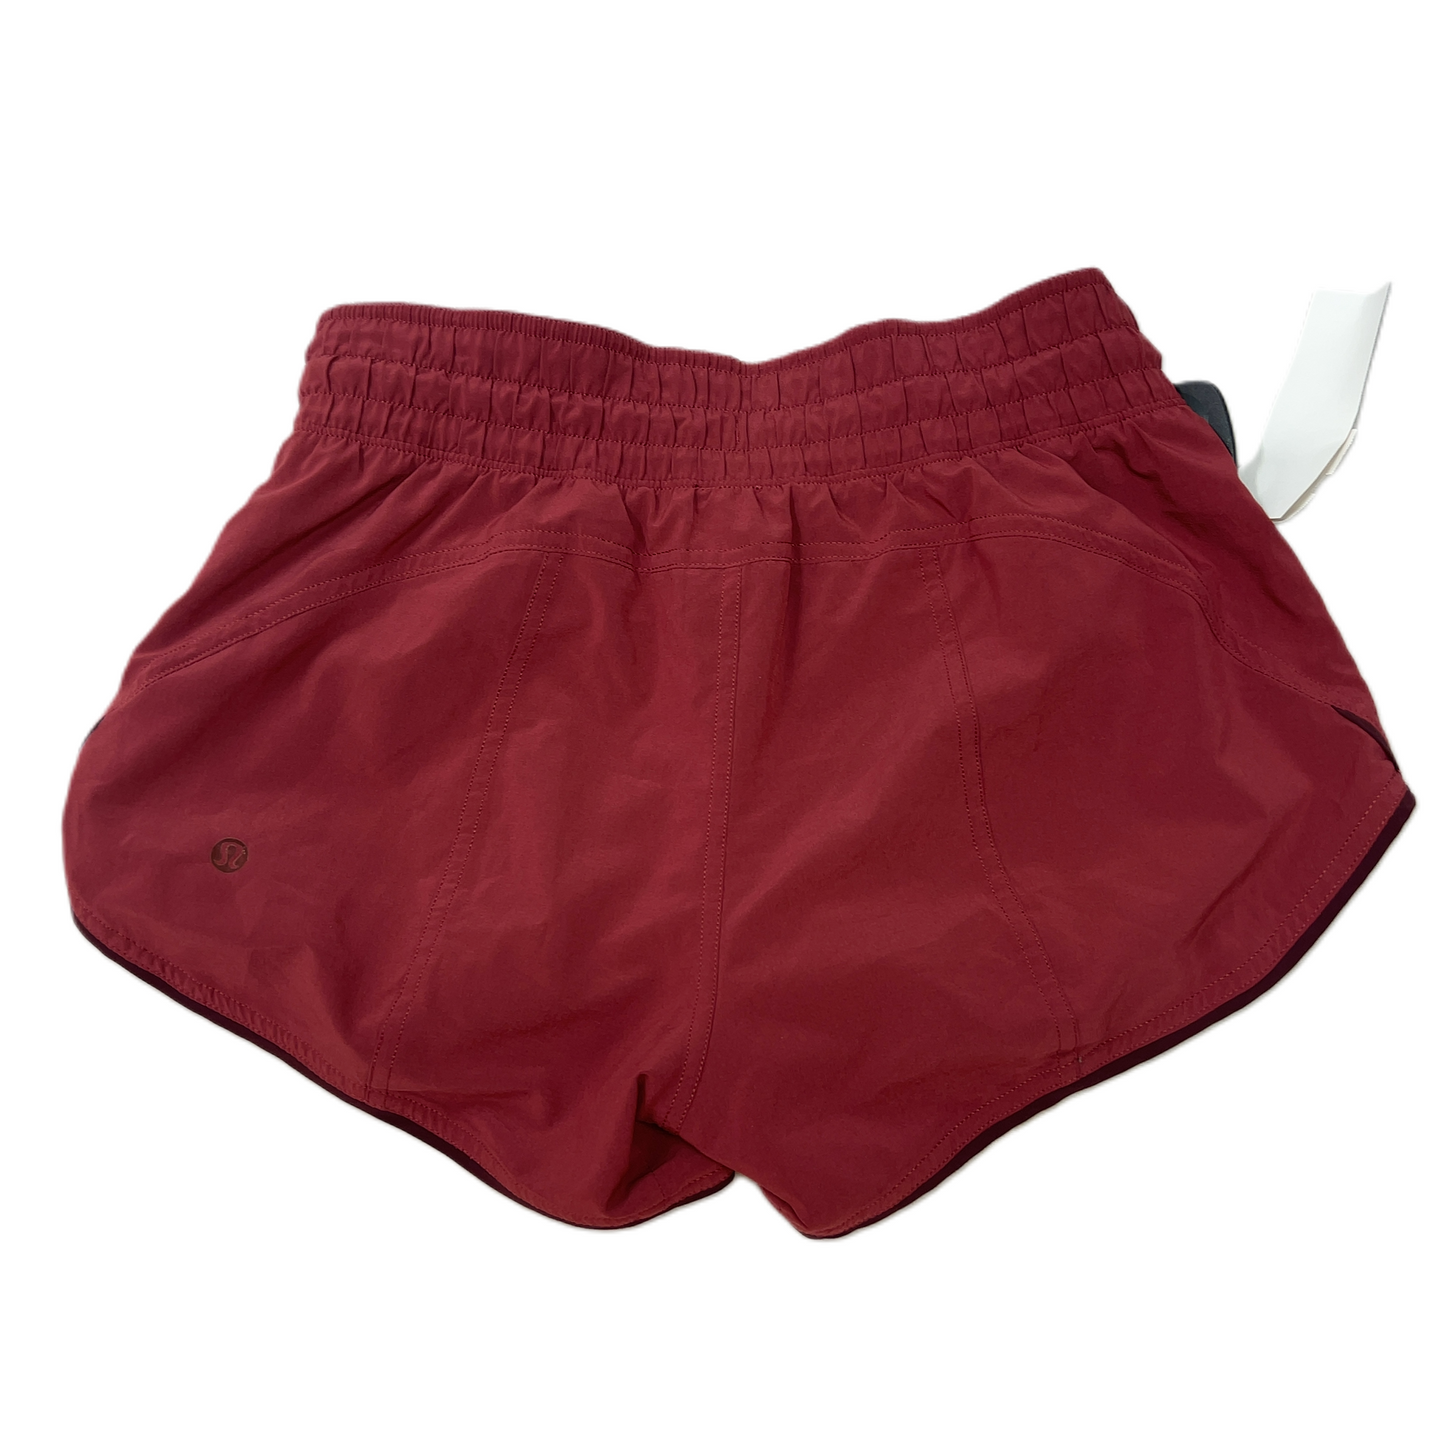 Red  Athletic Shorts By Lululemon  Size: S